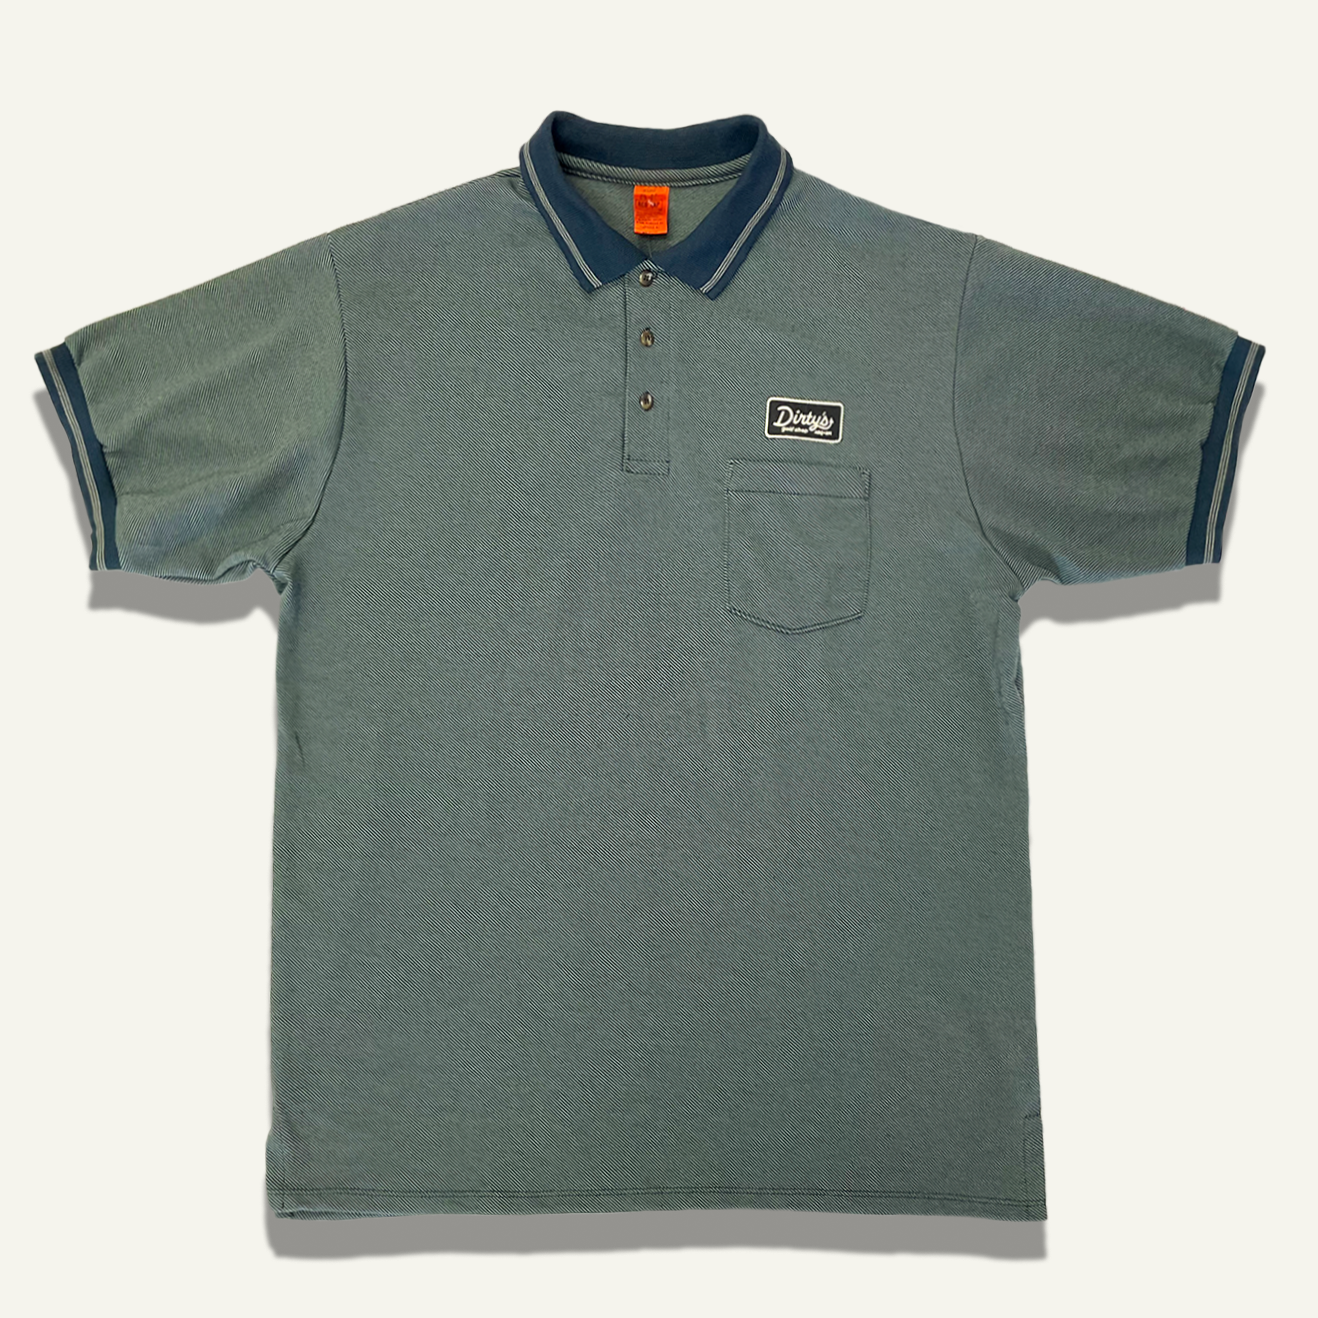 Dirty’s Knit Polo